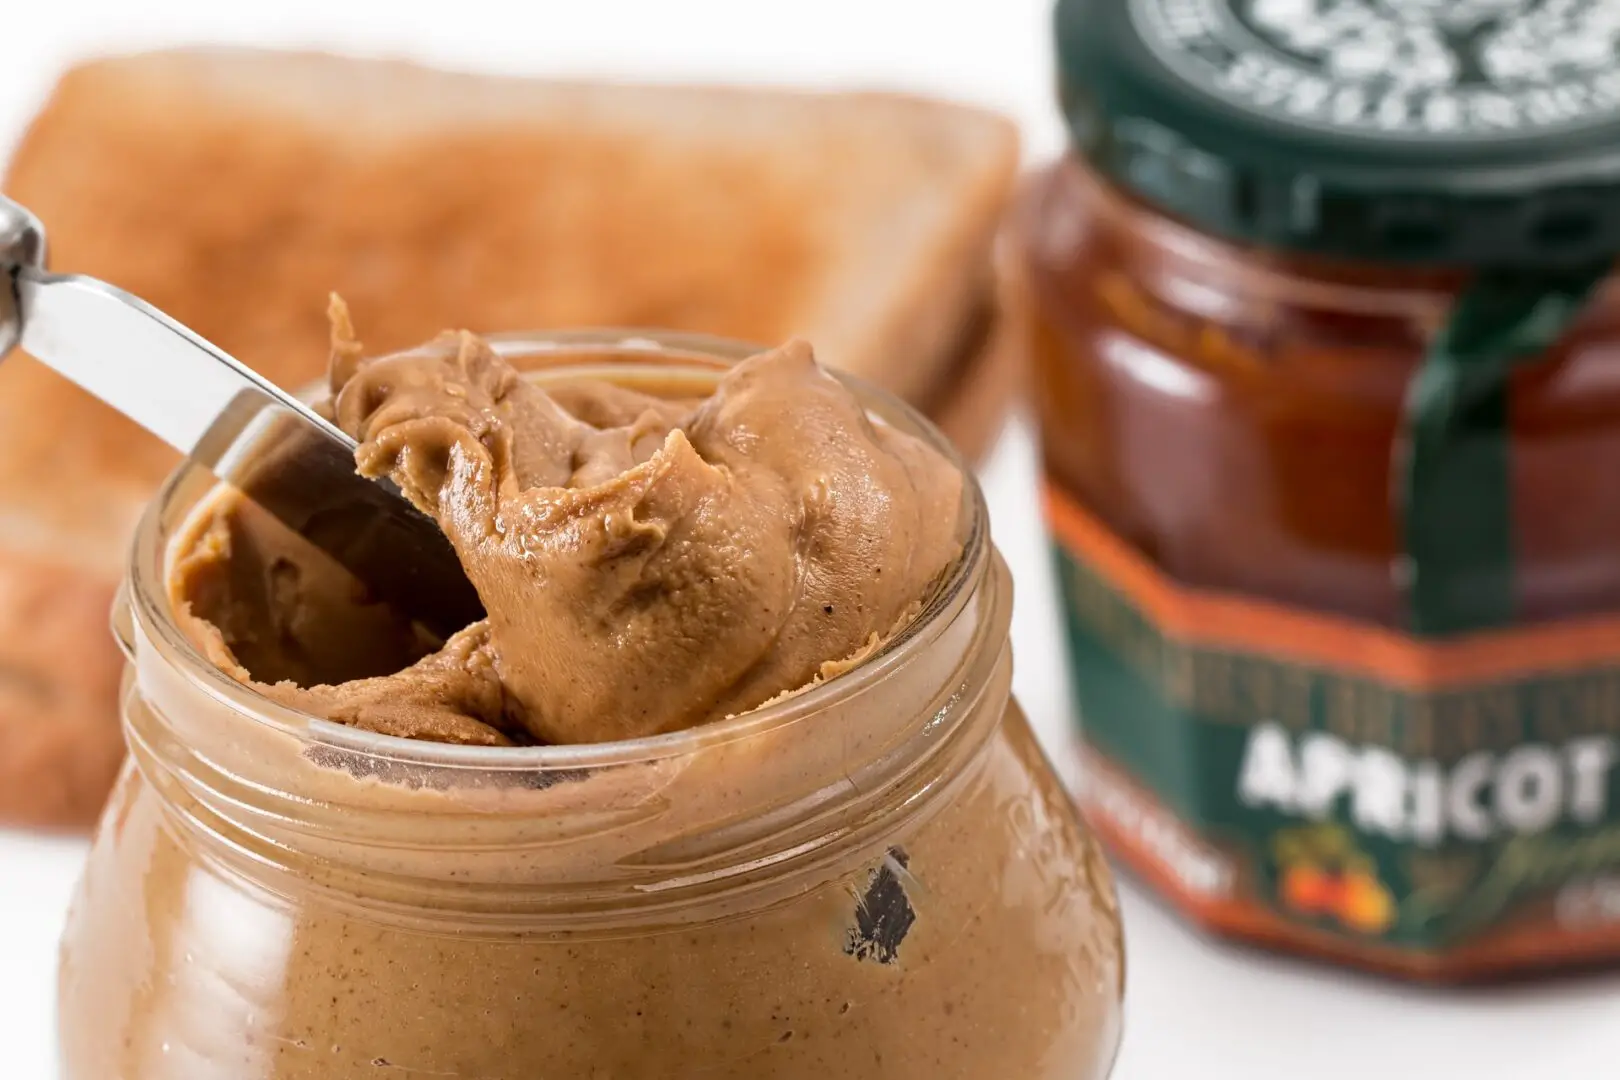 How To Store Peanut Butter After Opening